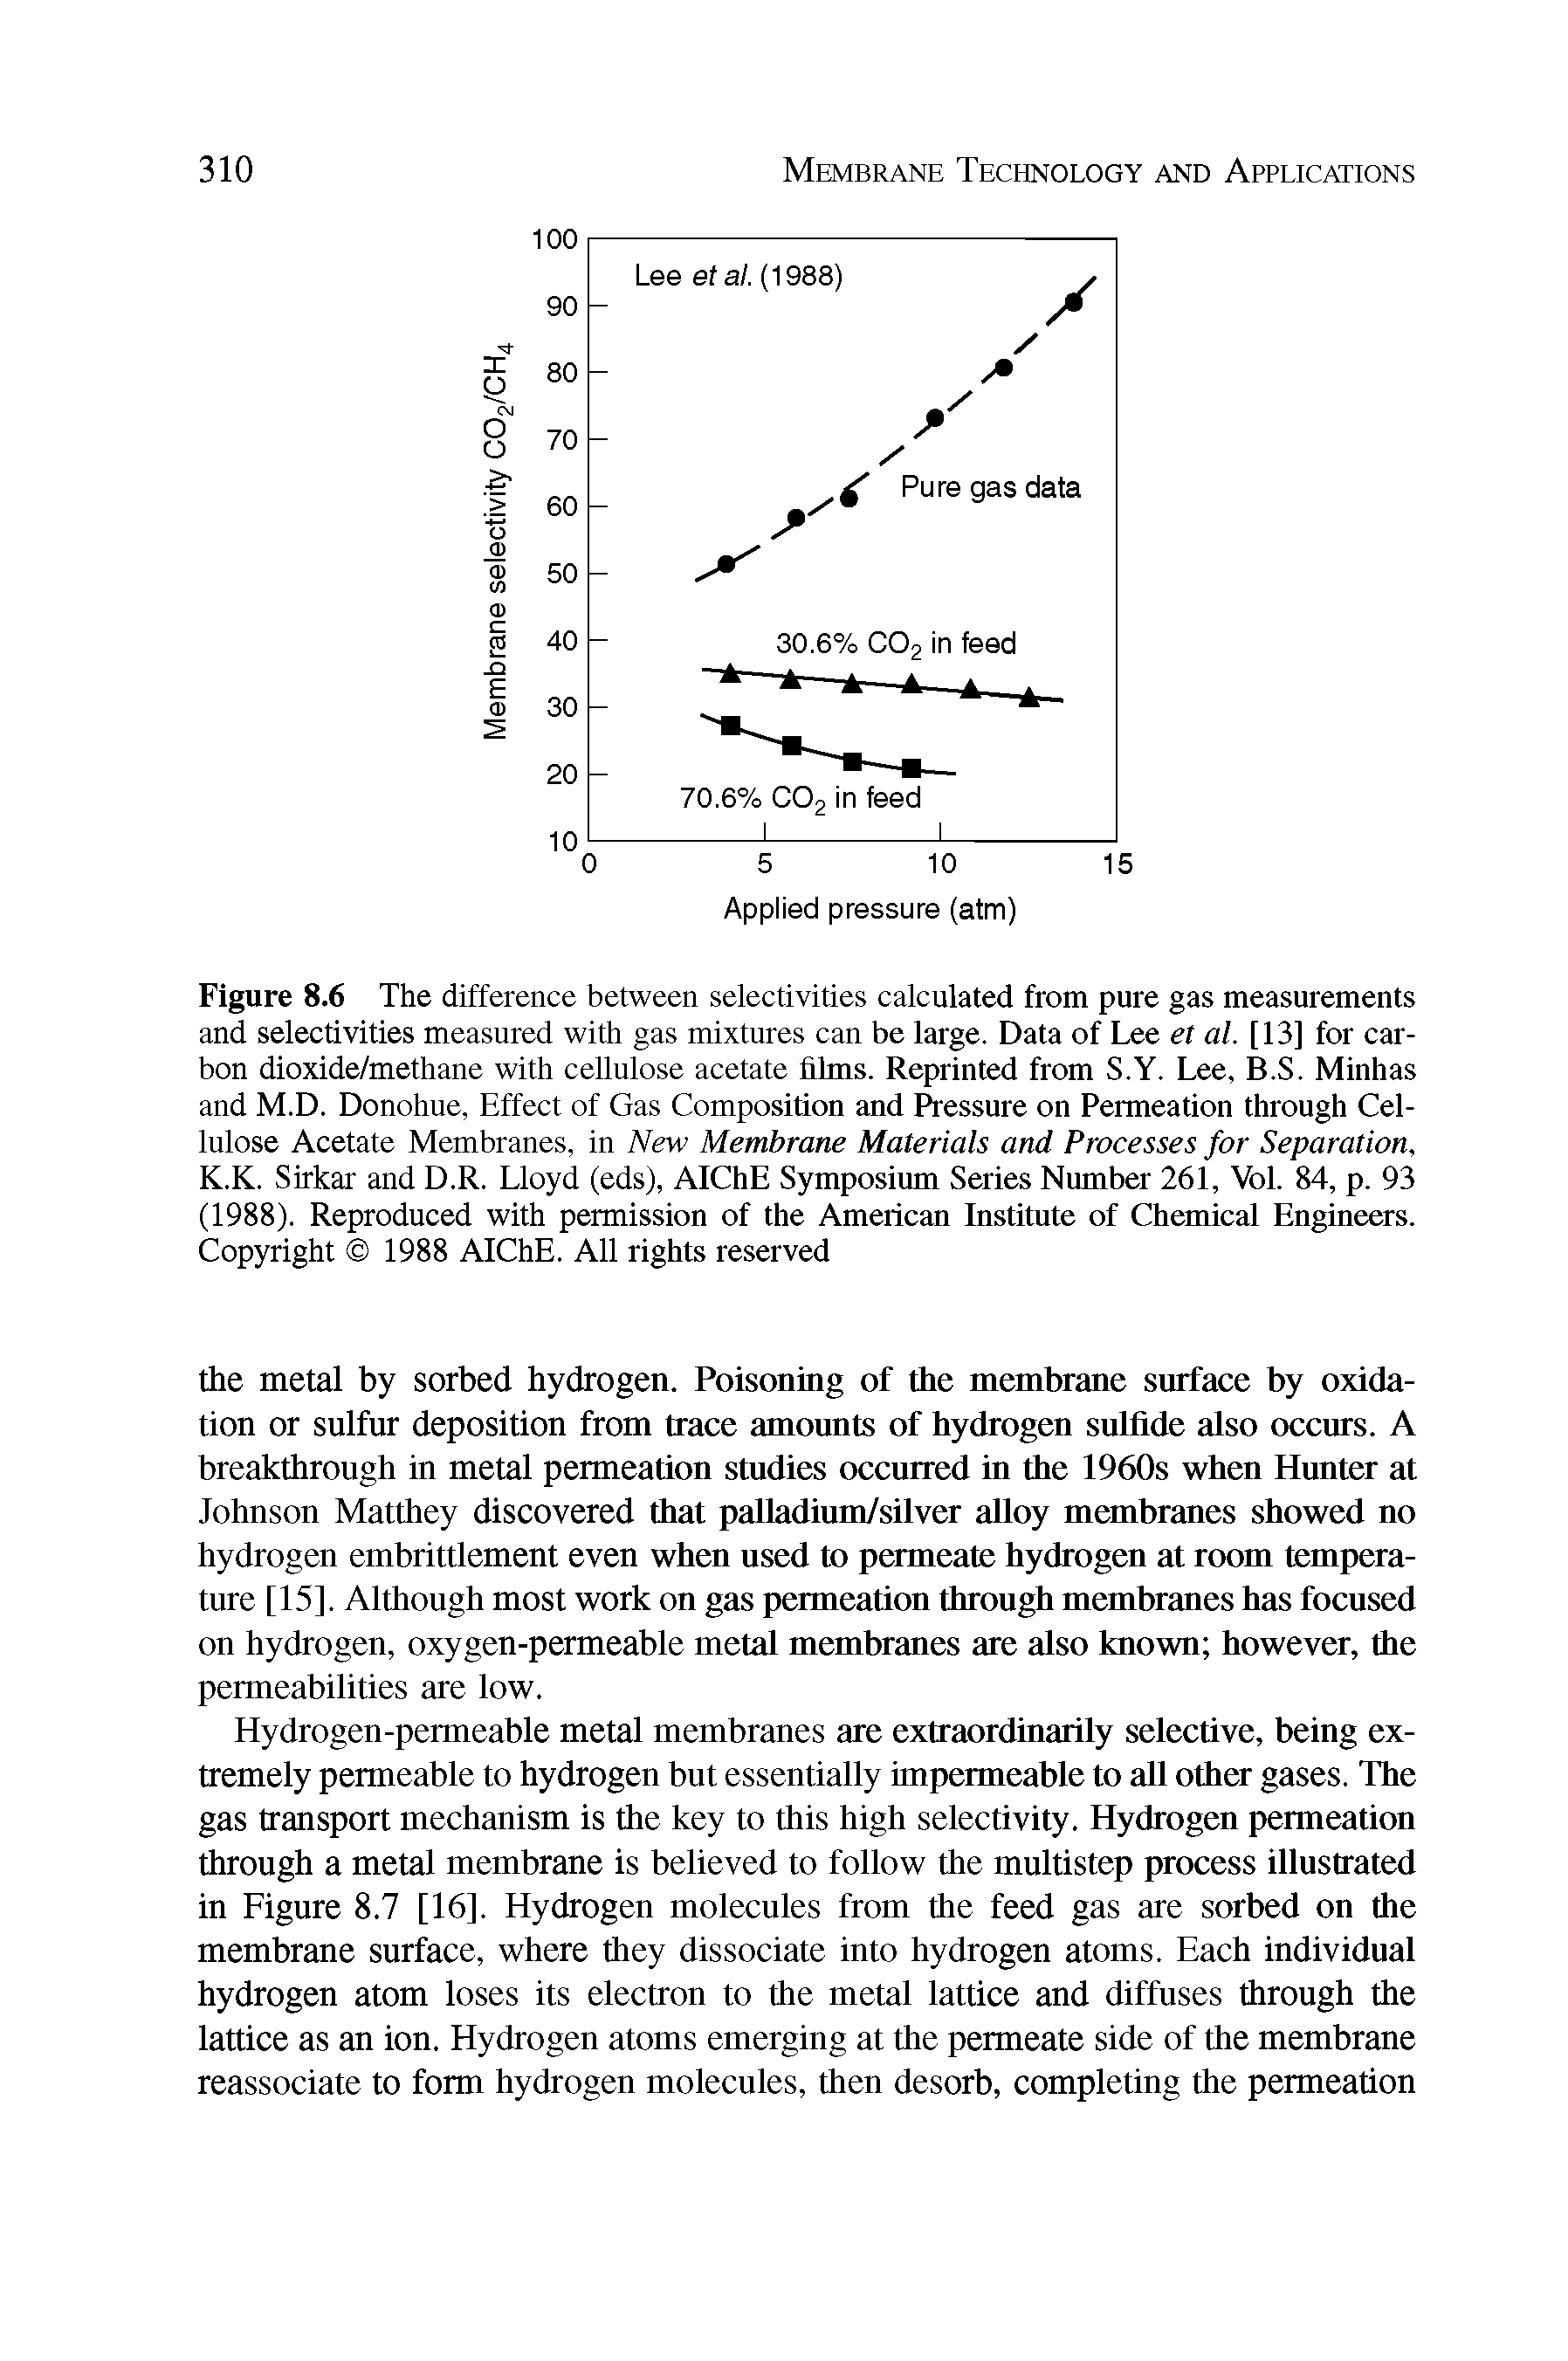 Figure 8.6 The difference between selectivities calculated from pure gas measurements and selectivities measured with gas mixtures can be large. Data of Lee et al. [13] for carbon dioxide/methane with cellulose acetate films. Reprinted from S.Y. Lee, B.S. Minhas and M.D. Donohue, Effect of Gas Composition and Pressure on Permeation through Cellulose Acetate Membranes, in New Membrane Materials and Processes for Separation, K.K. Sirkar and D.R. Lloyd (eds), AIChE Symposium Series Number 261, Vol. 84, p. 93 (1988). Reproduced with permission of the American Institute of Chemical Engineers. Copyright 1988 AIChE. All rights reserved...